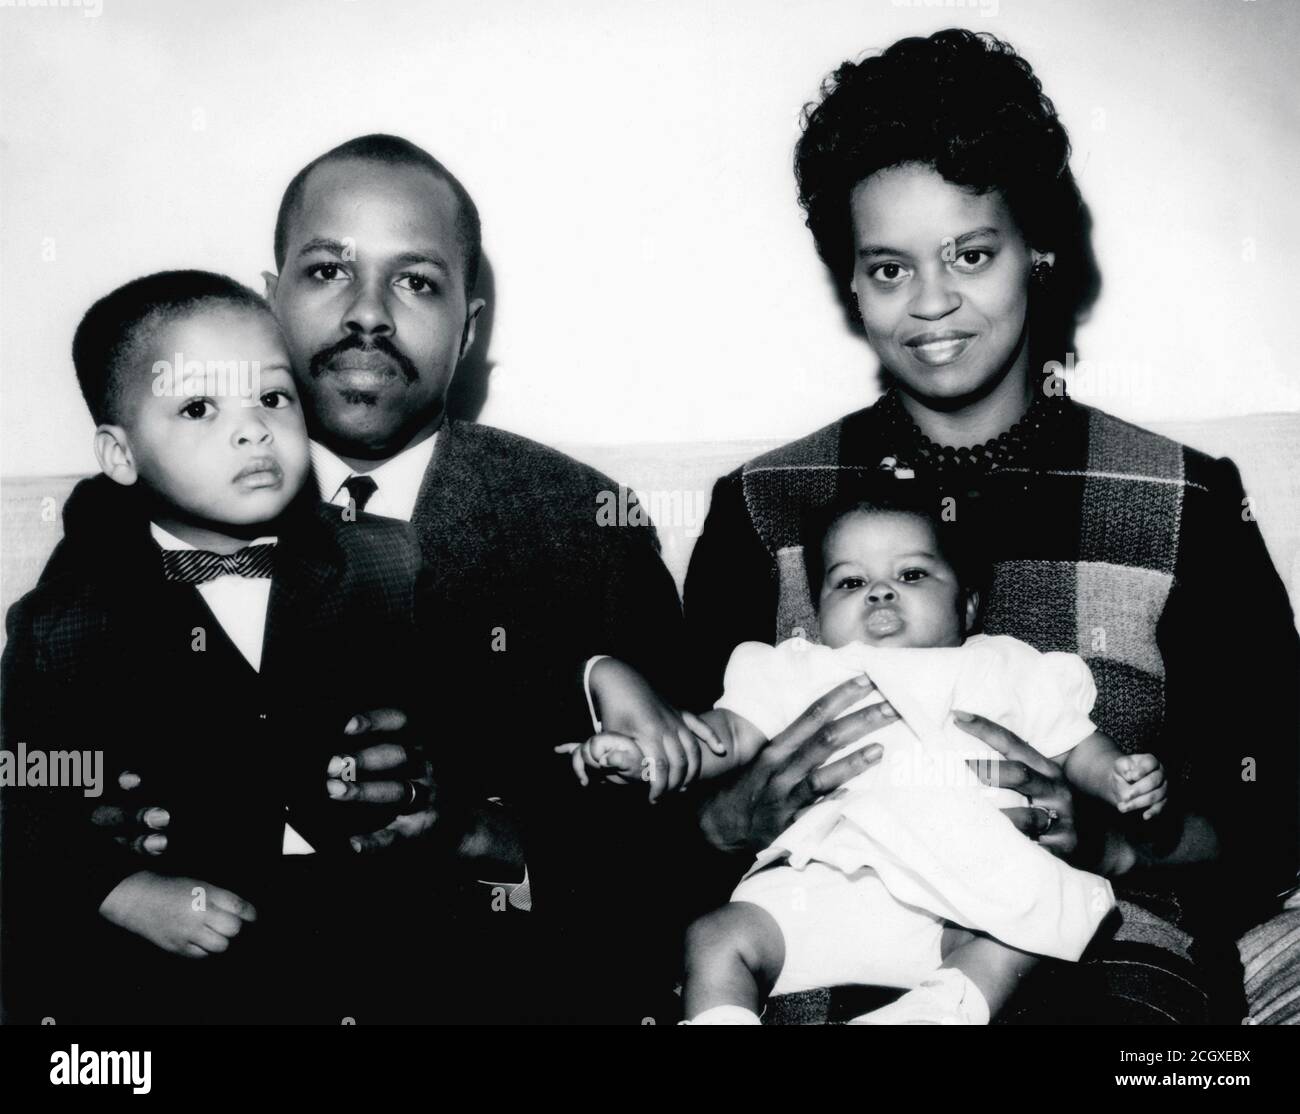 1964 , june , USA  : MICHELLE LaVaughn Robinson, future wife of american politician BARACK OBAMA ( born in 1961 ), President of United States from 2009 to 2017 . In this photo when was a baby with his family : father Fraser Robinson ( 1935 – 1991 ), mother  Marian Shields Robinson ( born in 1937 ) and brother Craig Malcolm Robinson ( born in 1962 ). - FIRST LADY - FAMIGLIA - genitori - parents - padre papà - madre mother - Presidente STATI UNITI AMERICA - POLITICO -  POLITICA - POLITIC - personalità personalità da giovane giovani - personality personalities when was young - child - children - Stock Photo